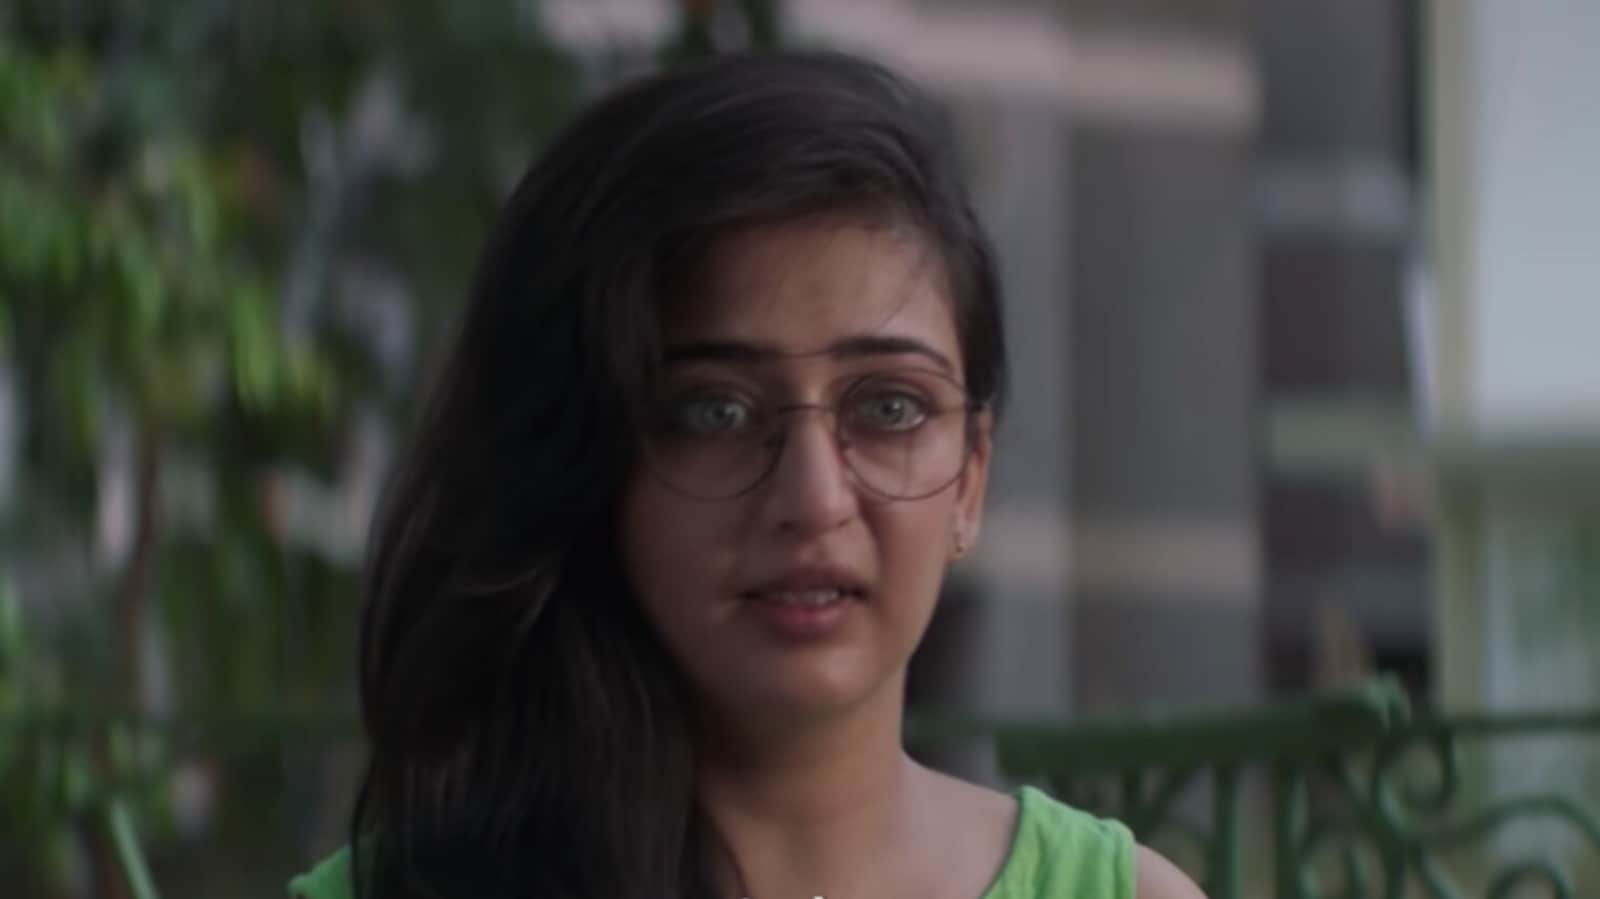 Achcham Madam Naanam Payirppu evaluate: Akshara Haasan’s movie is a refreshing comedy on sexual exploration